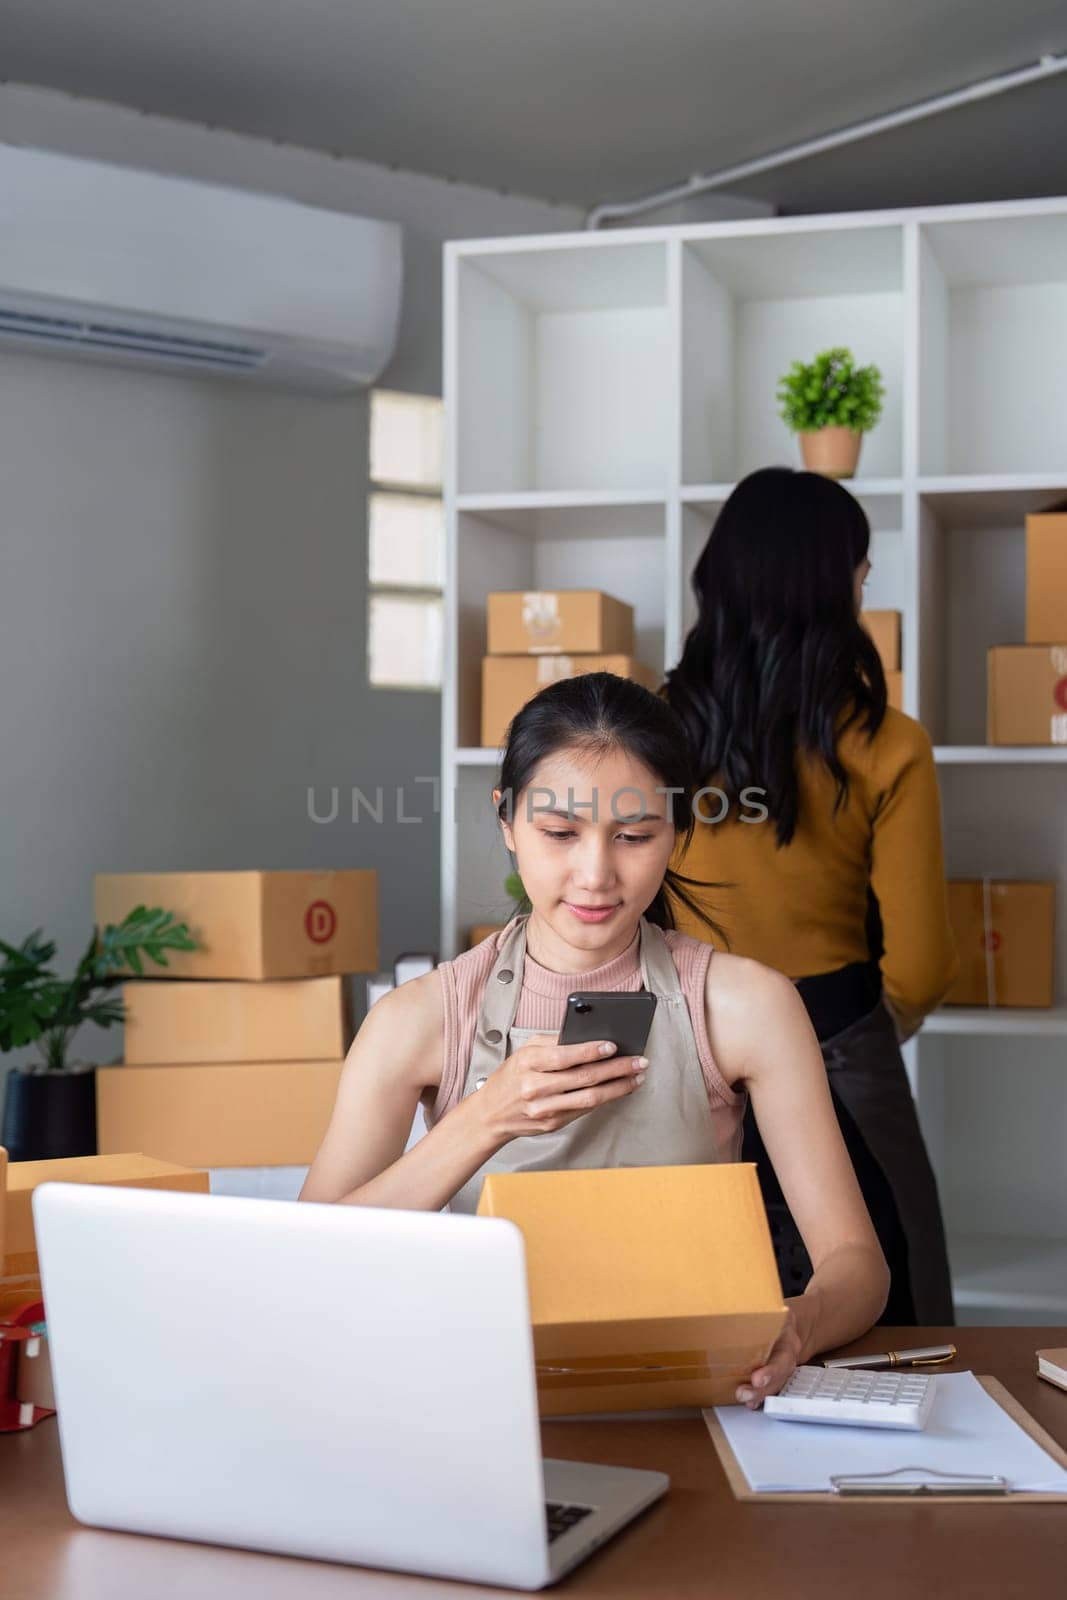 Entrepreneur managing online business from home office. ecommerce owner preparing packages for shipment and checking orders on a smartphone. by nateemee